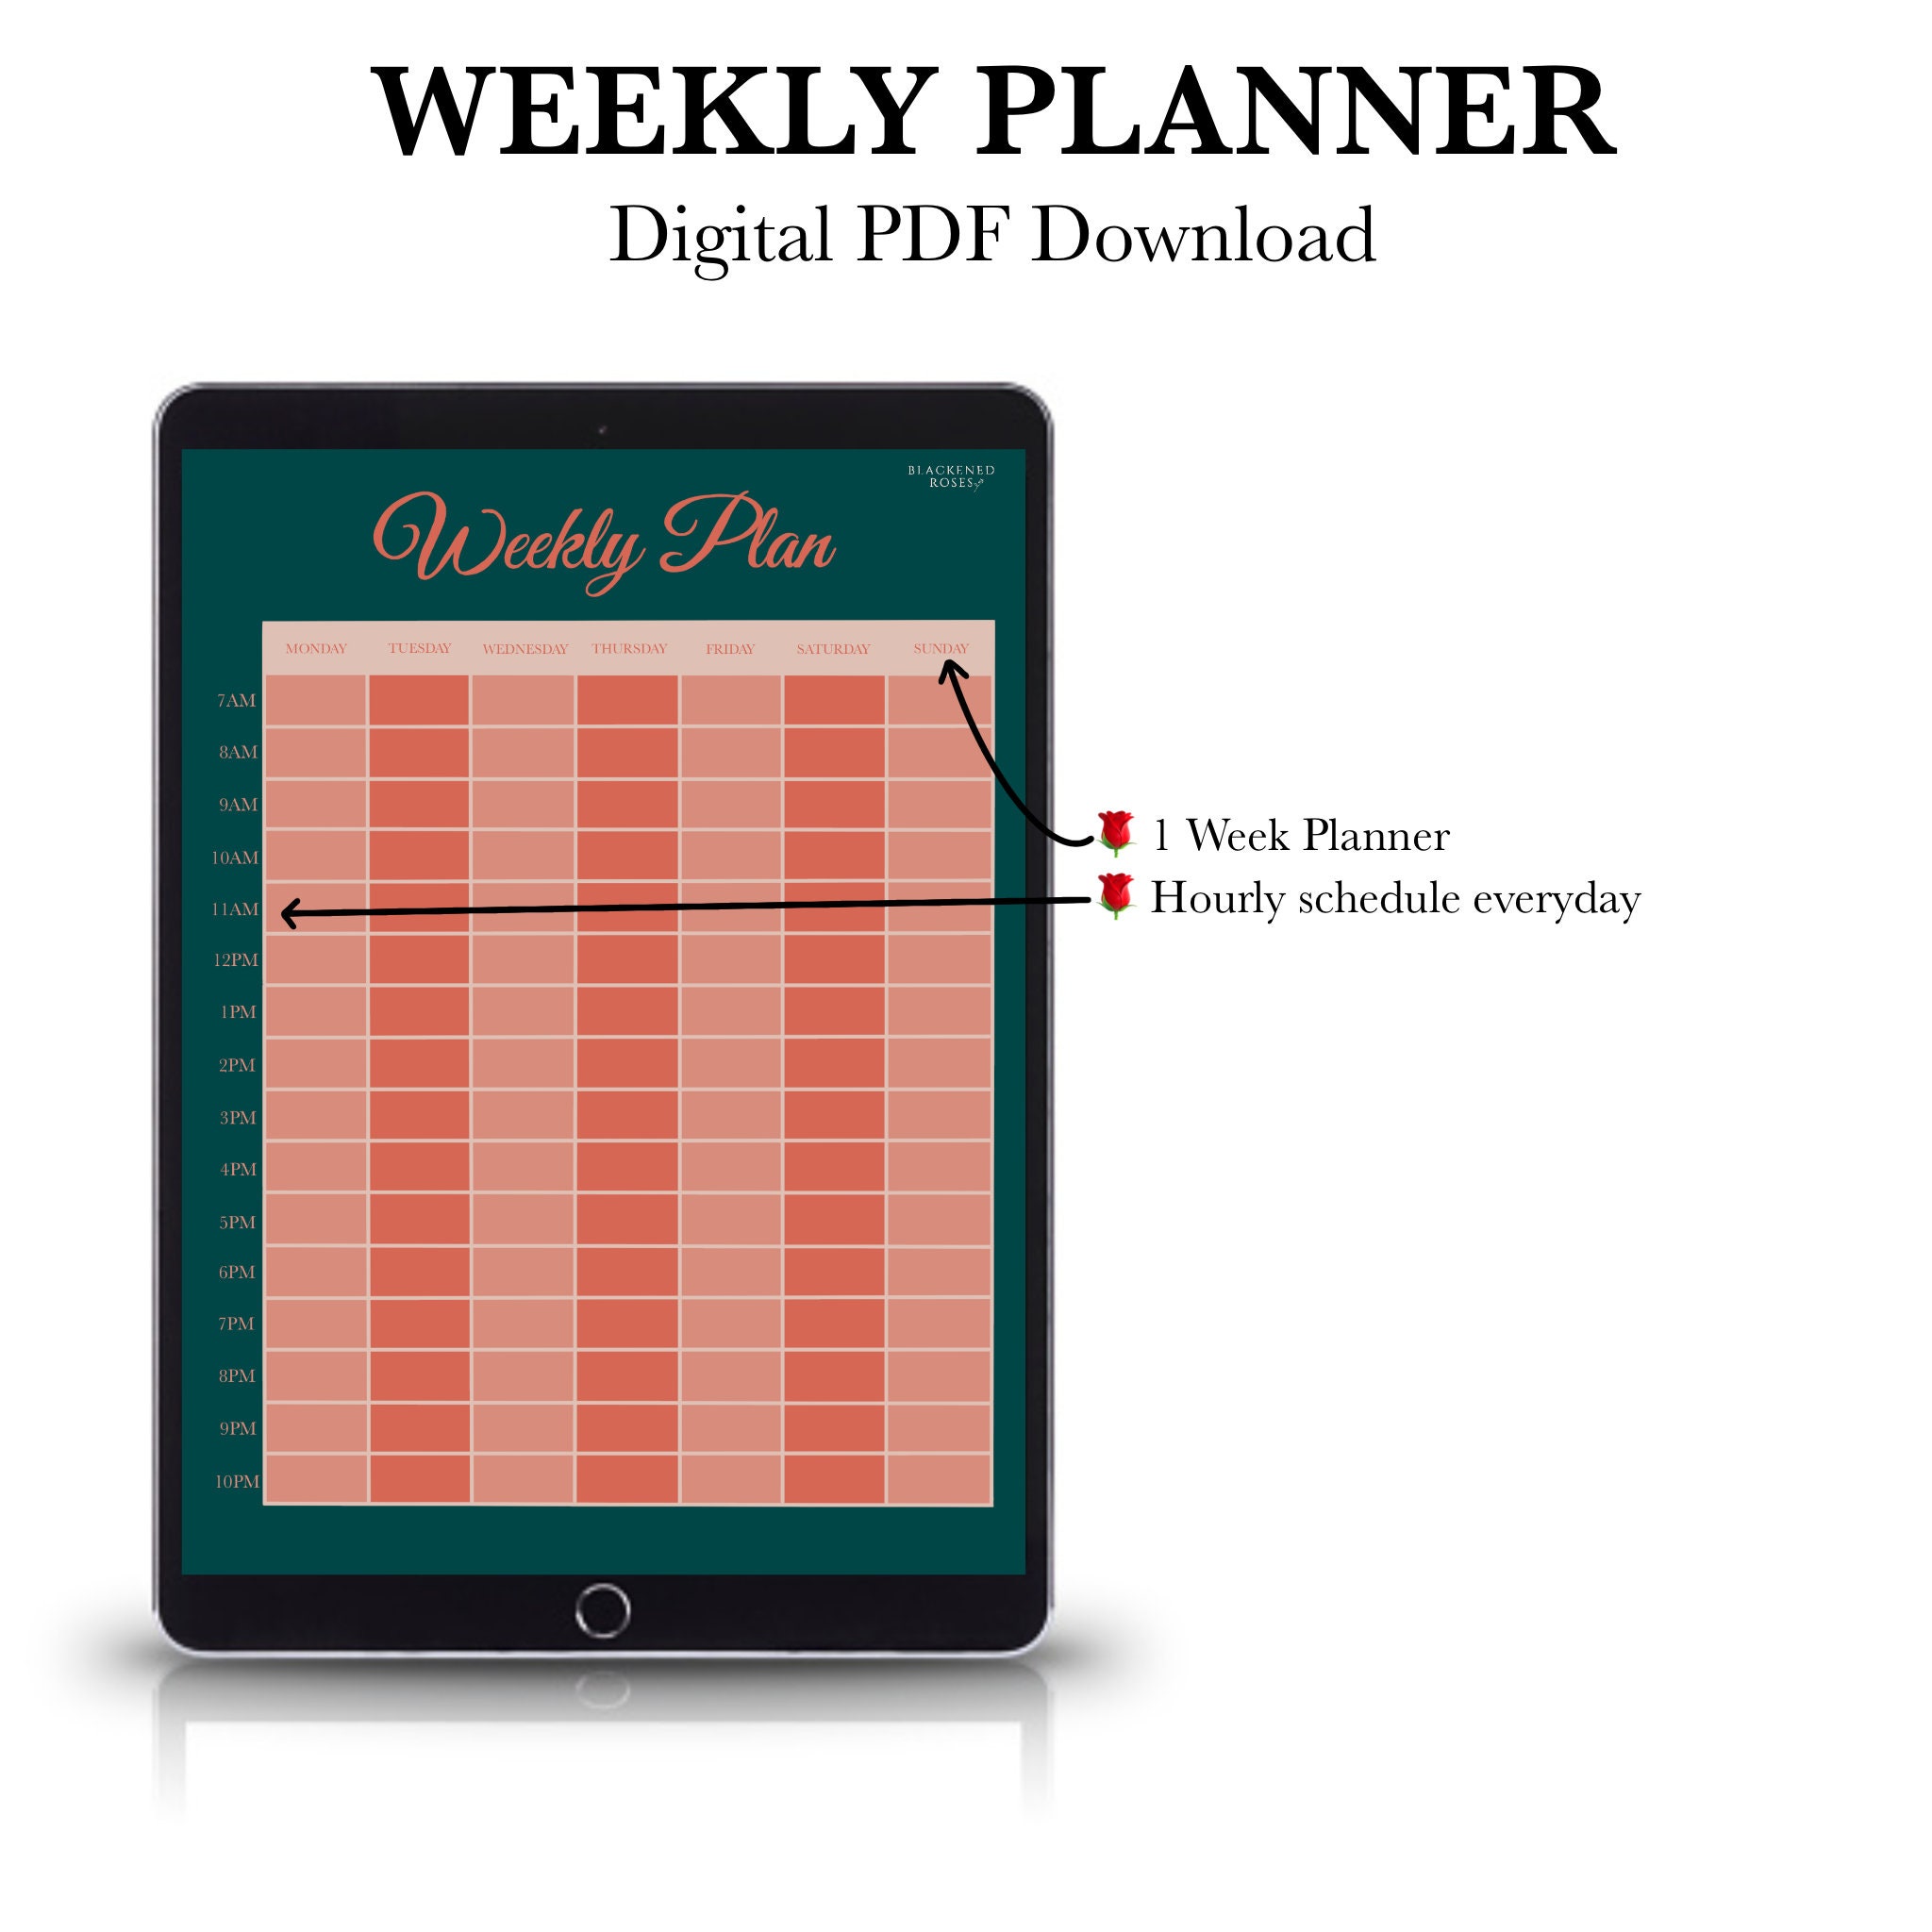 weekly-planner-digital-download-ipad-goodnotes-tablet-etsy